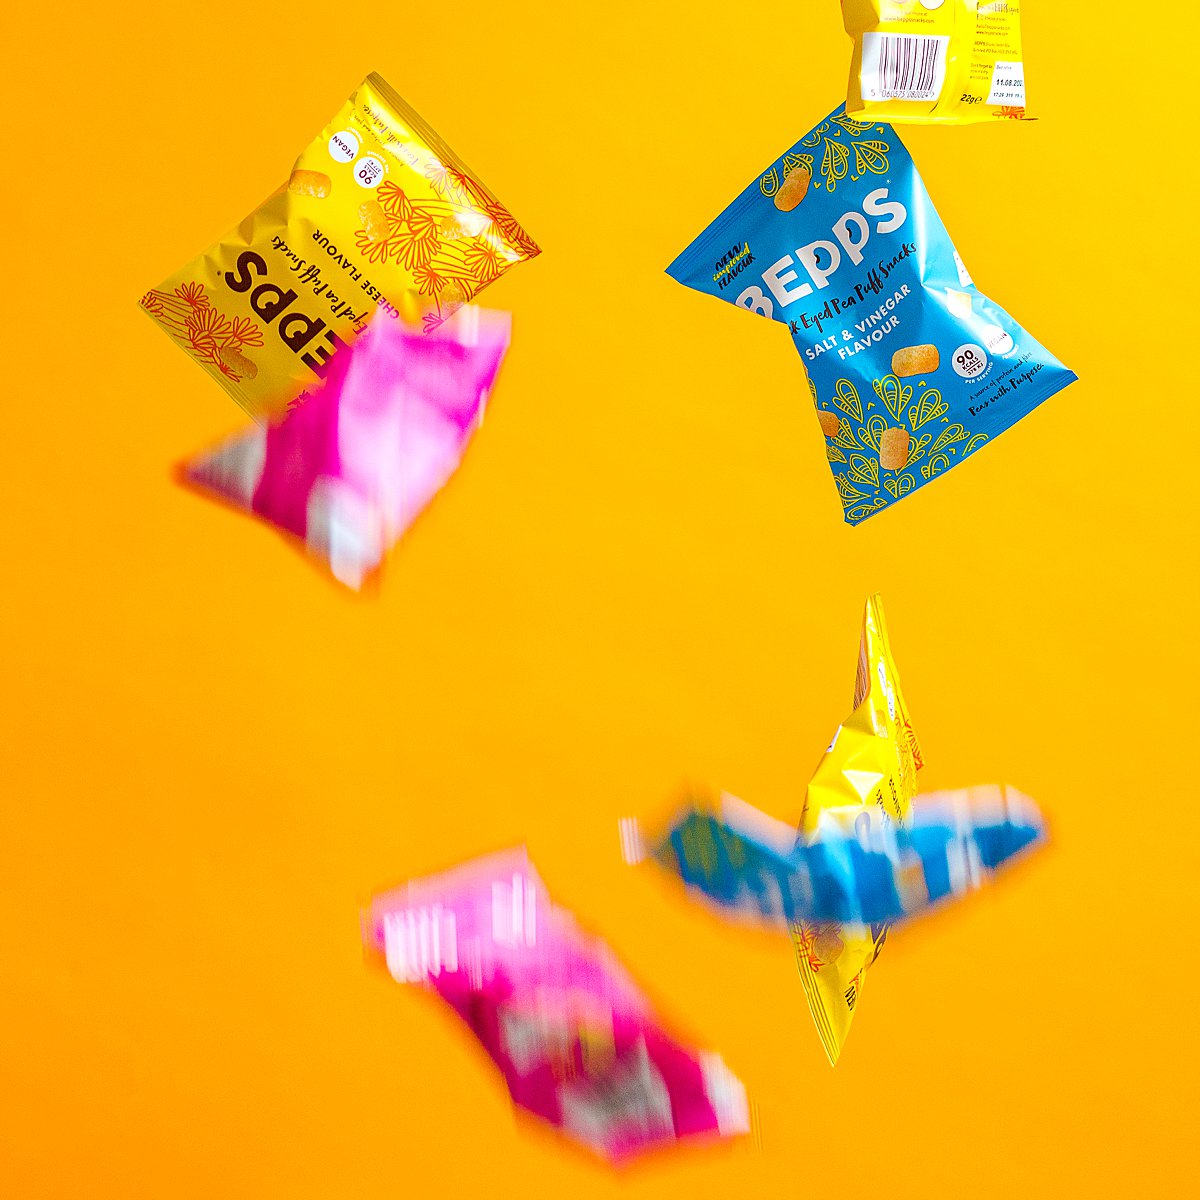 Colourful content creation for Bepps vegan snacks. Styled product and food photography by Marianne Taylor.